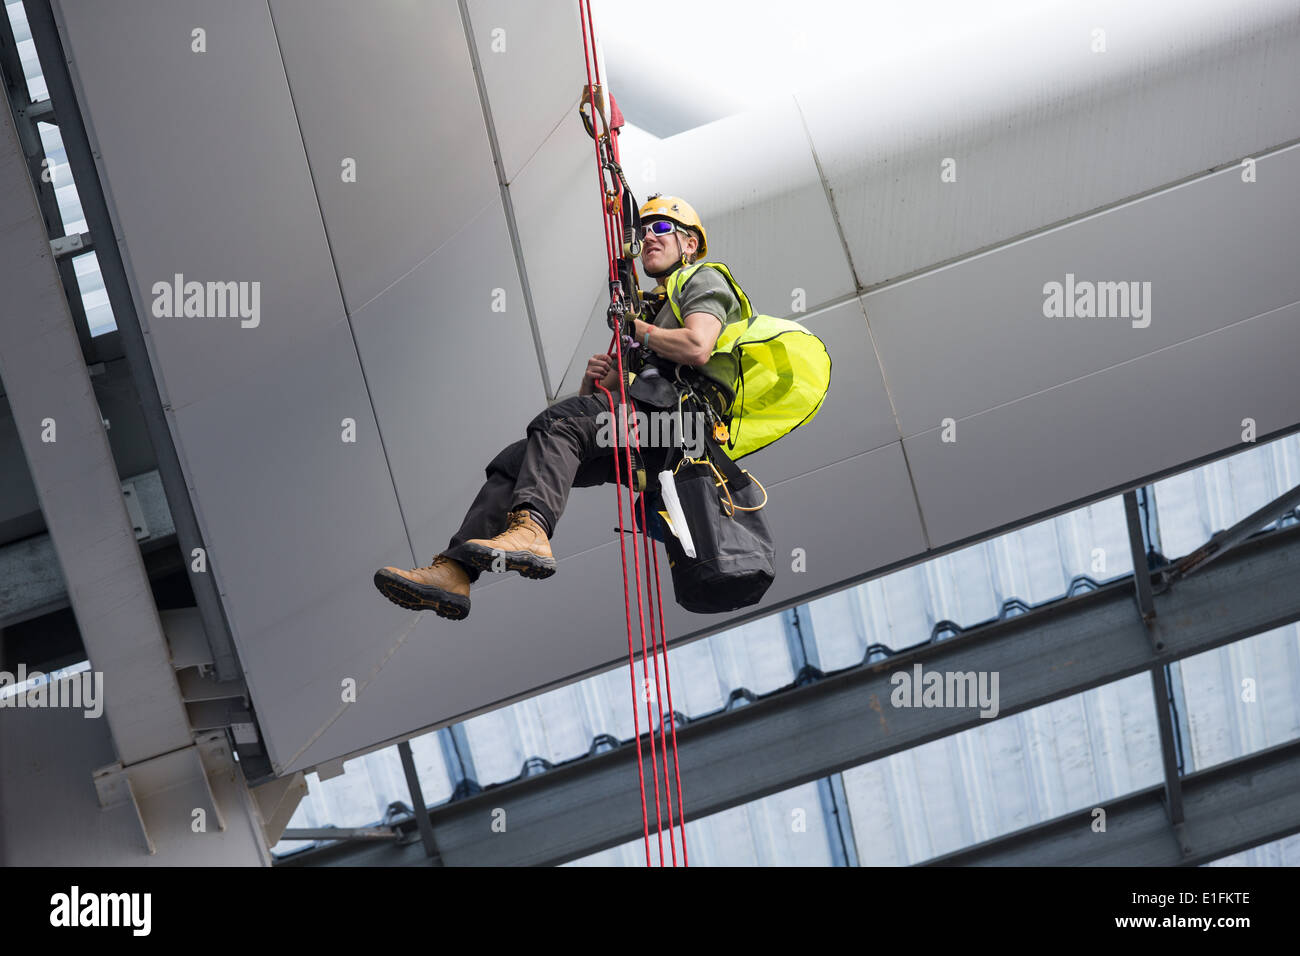 Tradesman workman cleaning a roof using ropes and pulleys abseil mountaineering climbing equipment Stock Photo